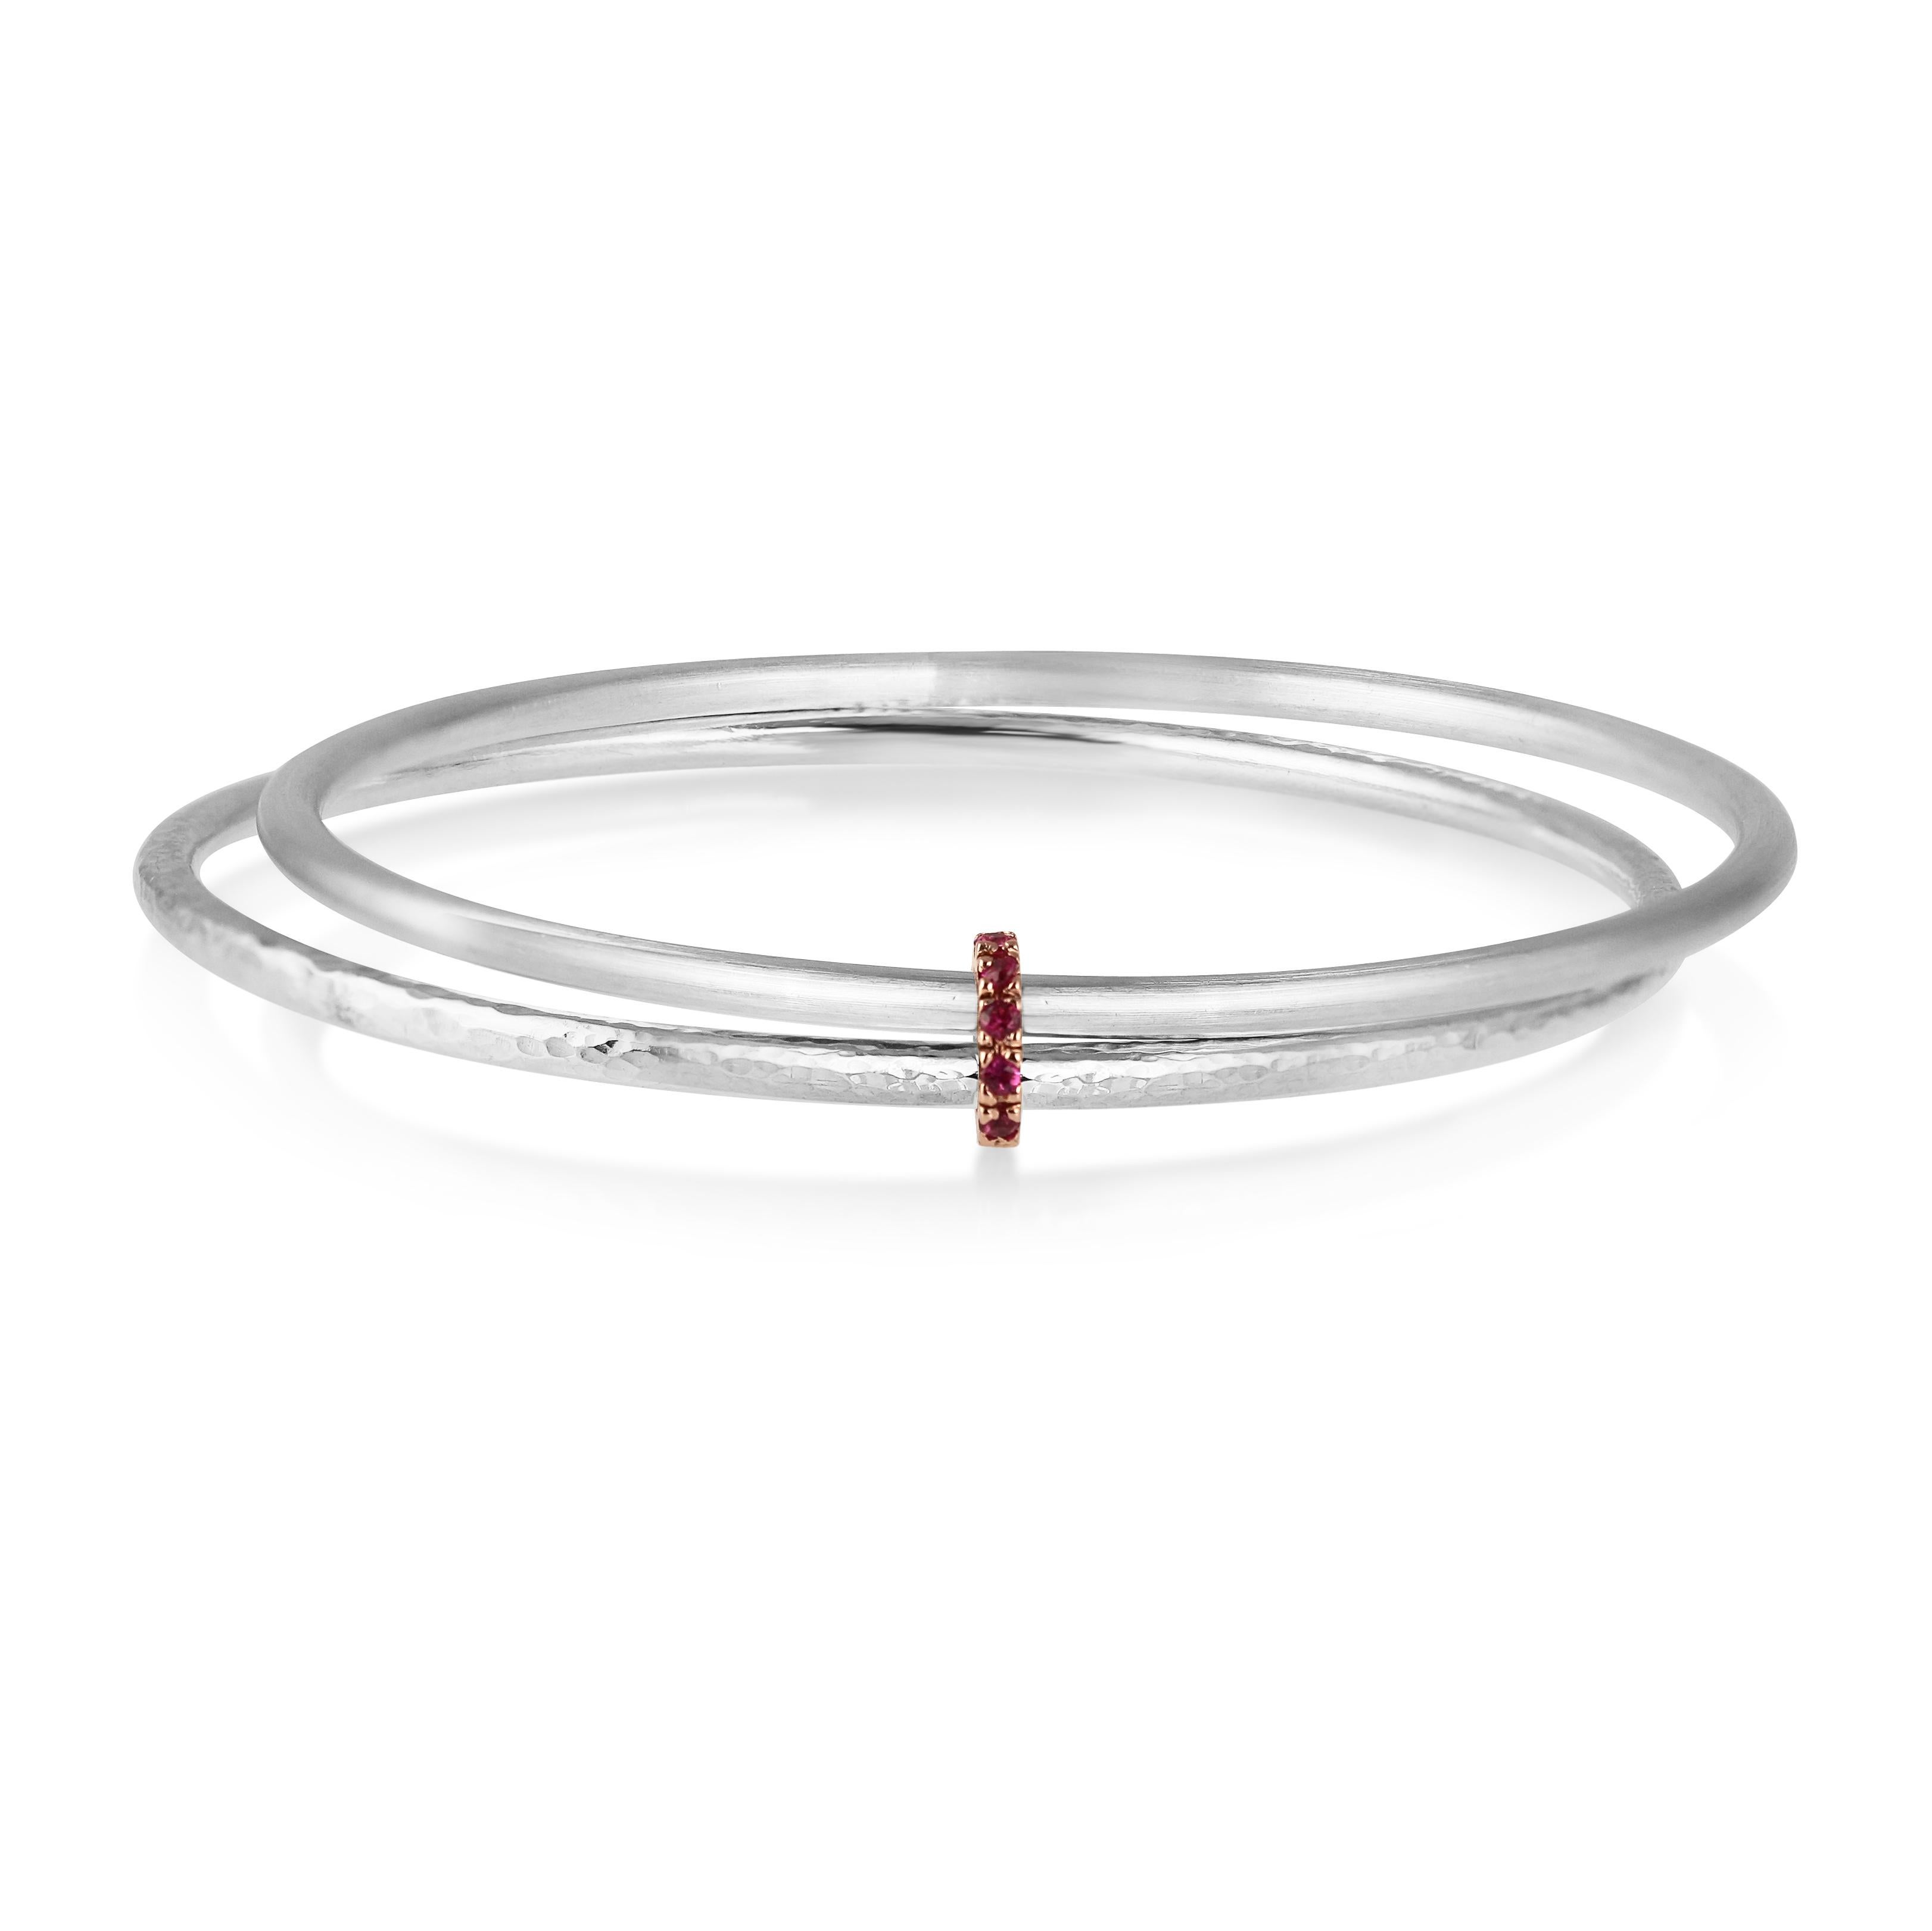 Twin 9 karat white gold bangles, both the same and yet different. The one a shimmering hammer finish, the other a smooth satin texture. Bound together, always, by rose gold & pink rubies.

Ruby's are know as the 'King of Gems' and represent love,